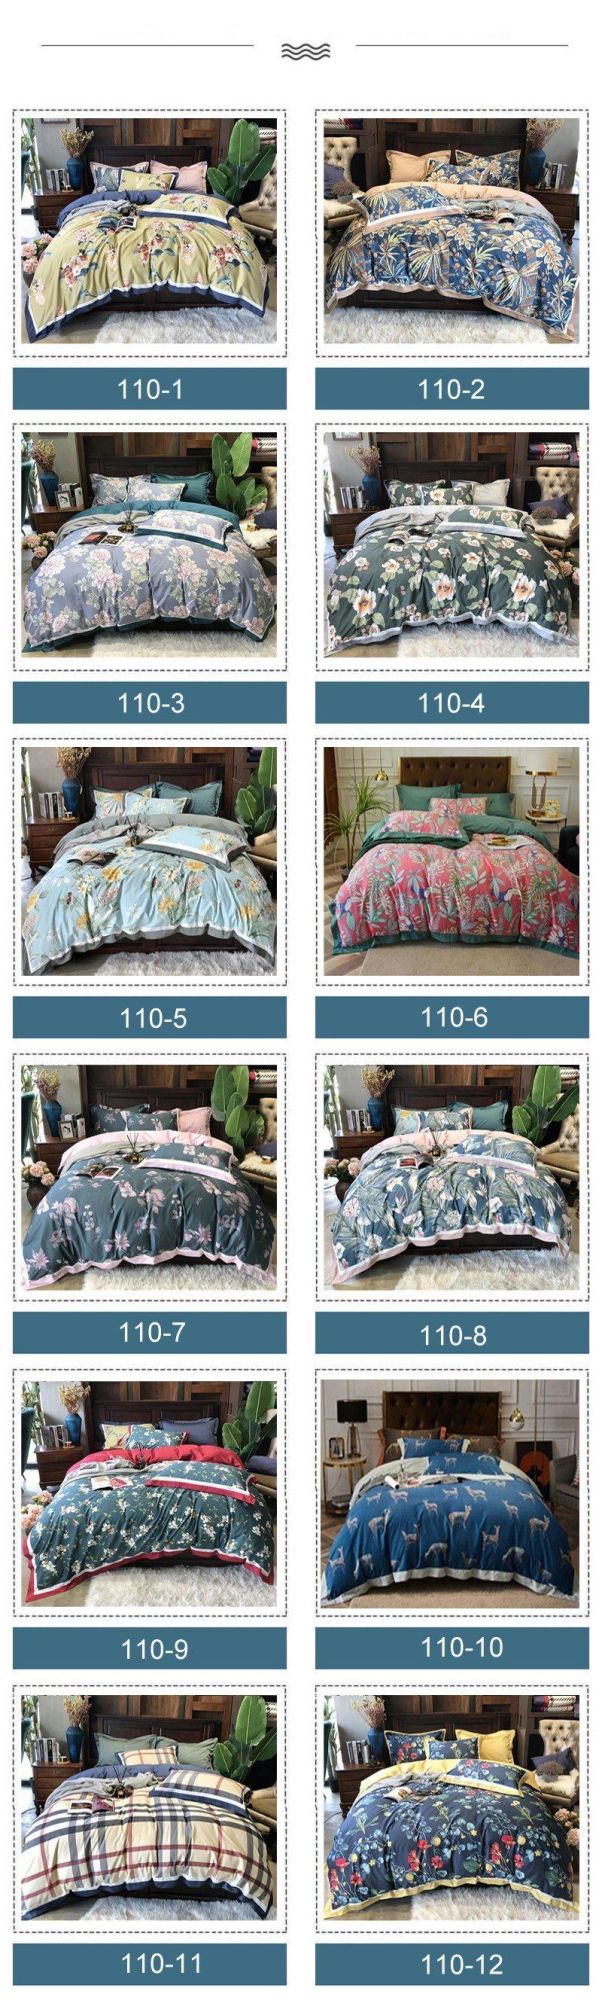 New Product Cheap Price Bedding Cotton Fabric Soft for Single Bed Duvet Cover Digital Printing